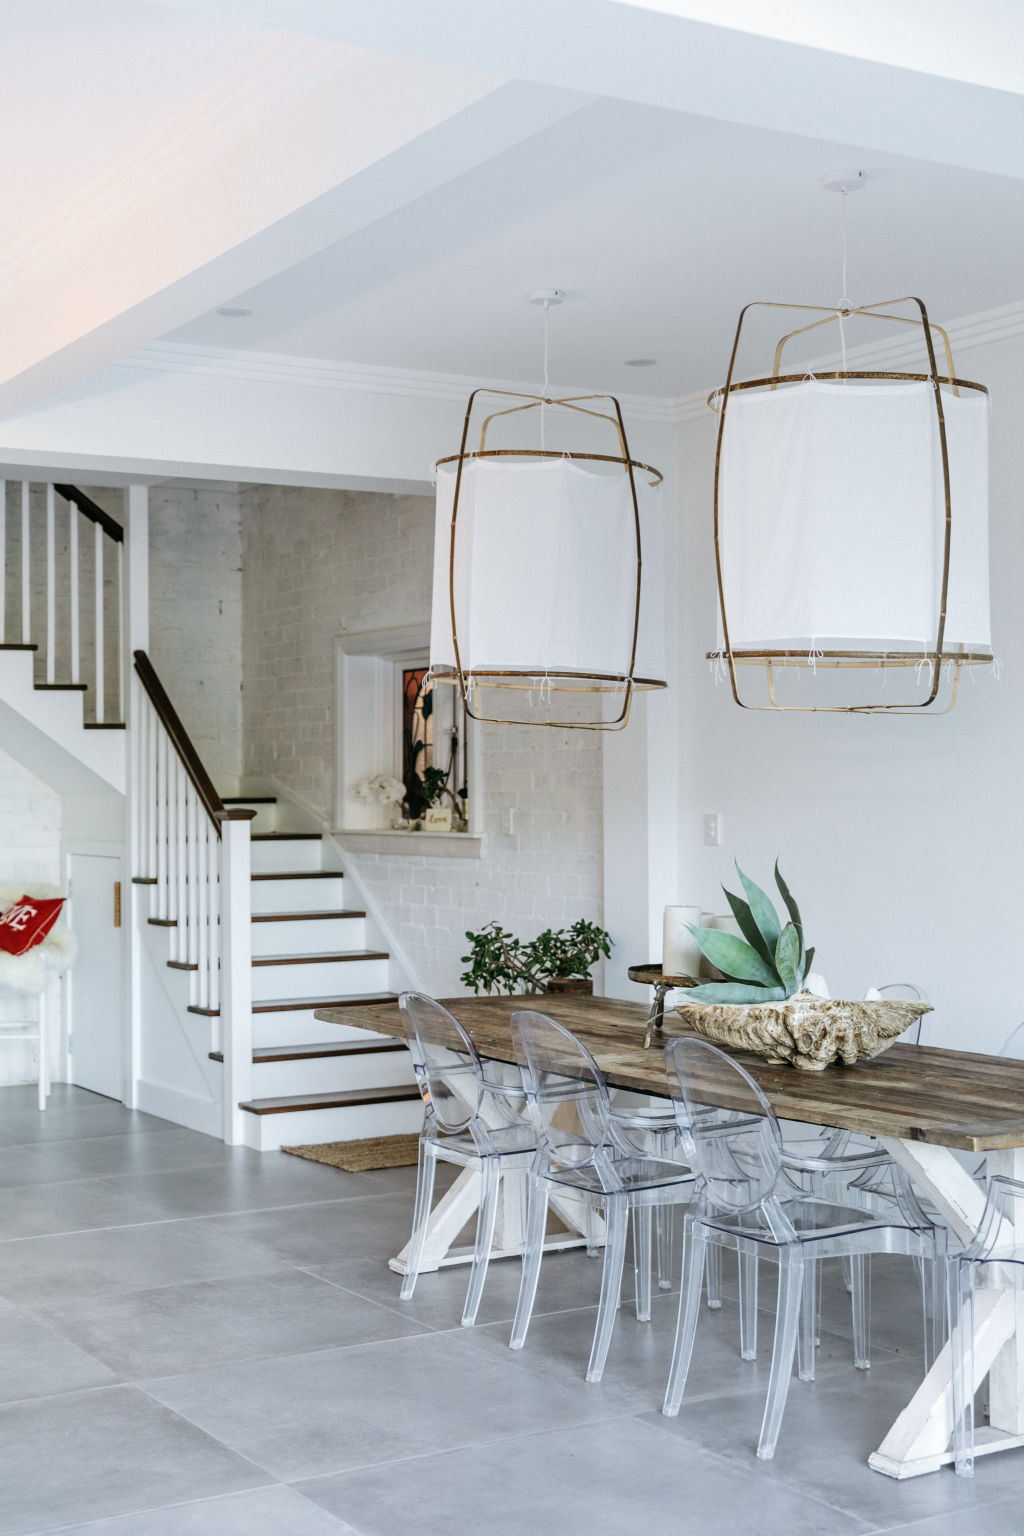 The large kitchen and living area downstairs is the focal point of the home. Photo: Caroline McCredie